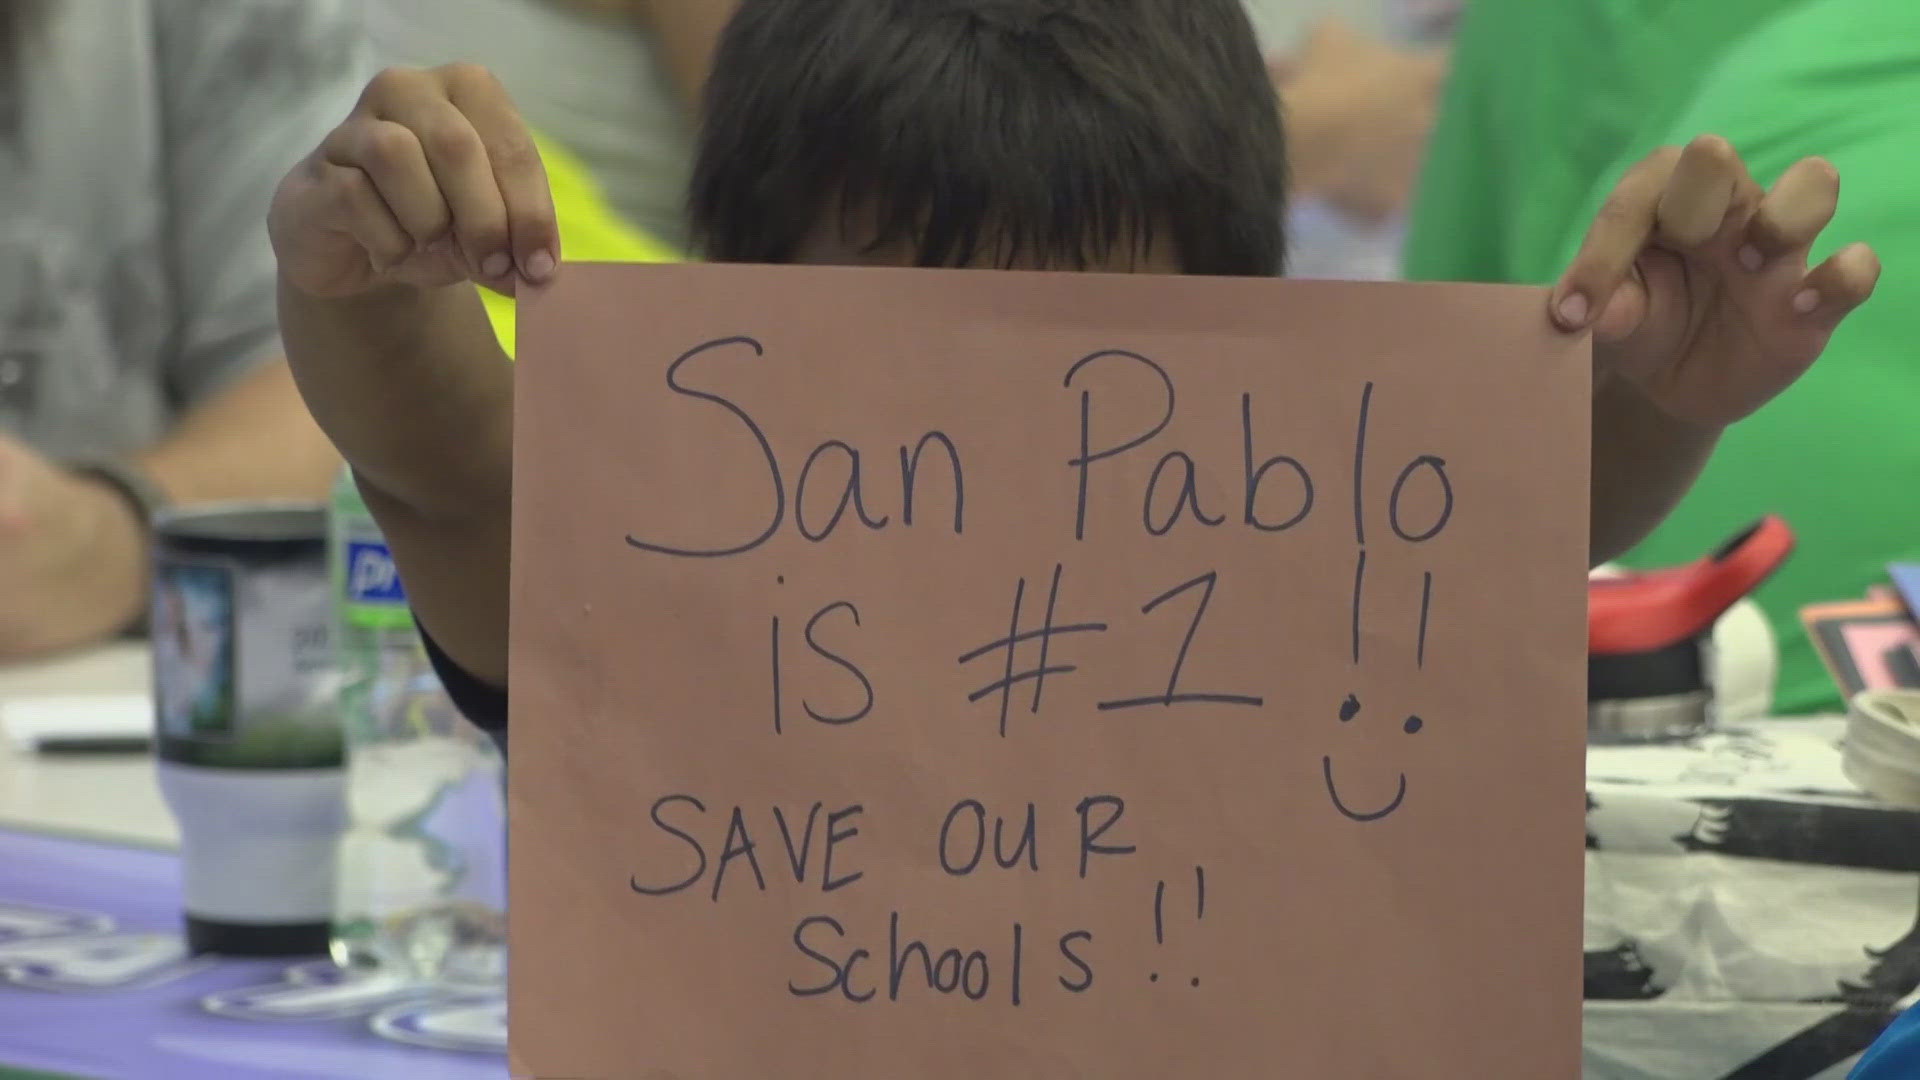 DCPS is planning to close or consolidate schools next year. Tuesday, a meeting was held for parents to find out how they could save San Pablo.